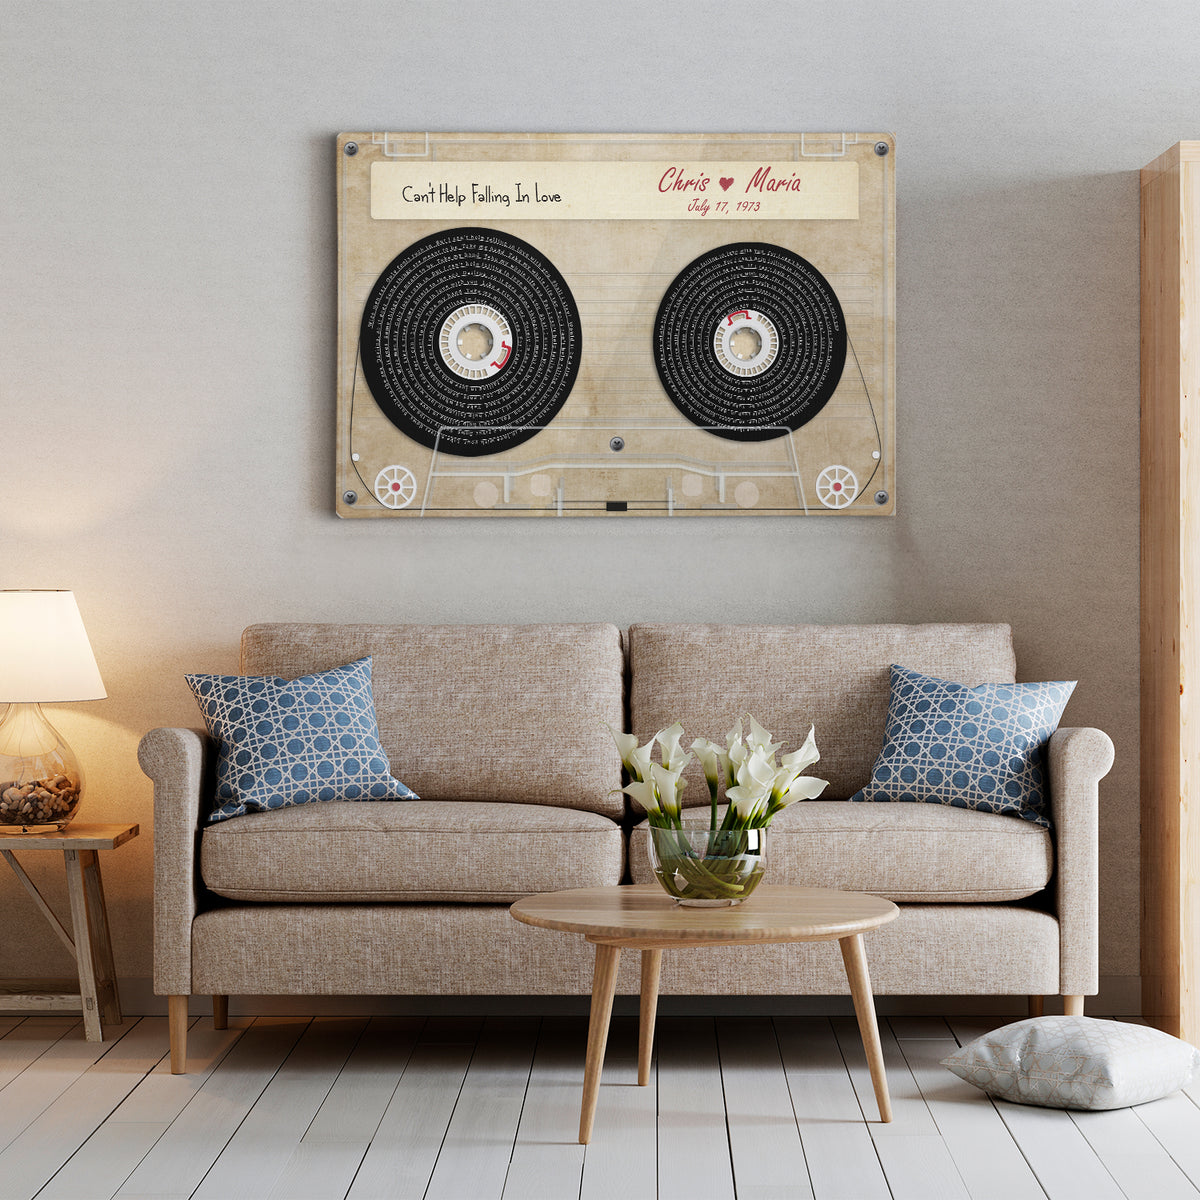 Cassette Tape Art Prints | Customize With Your Favorite Song Lyrics